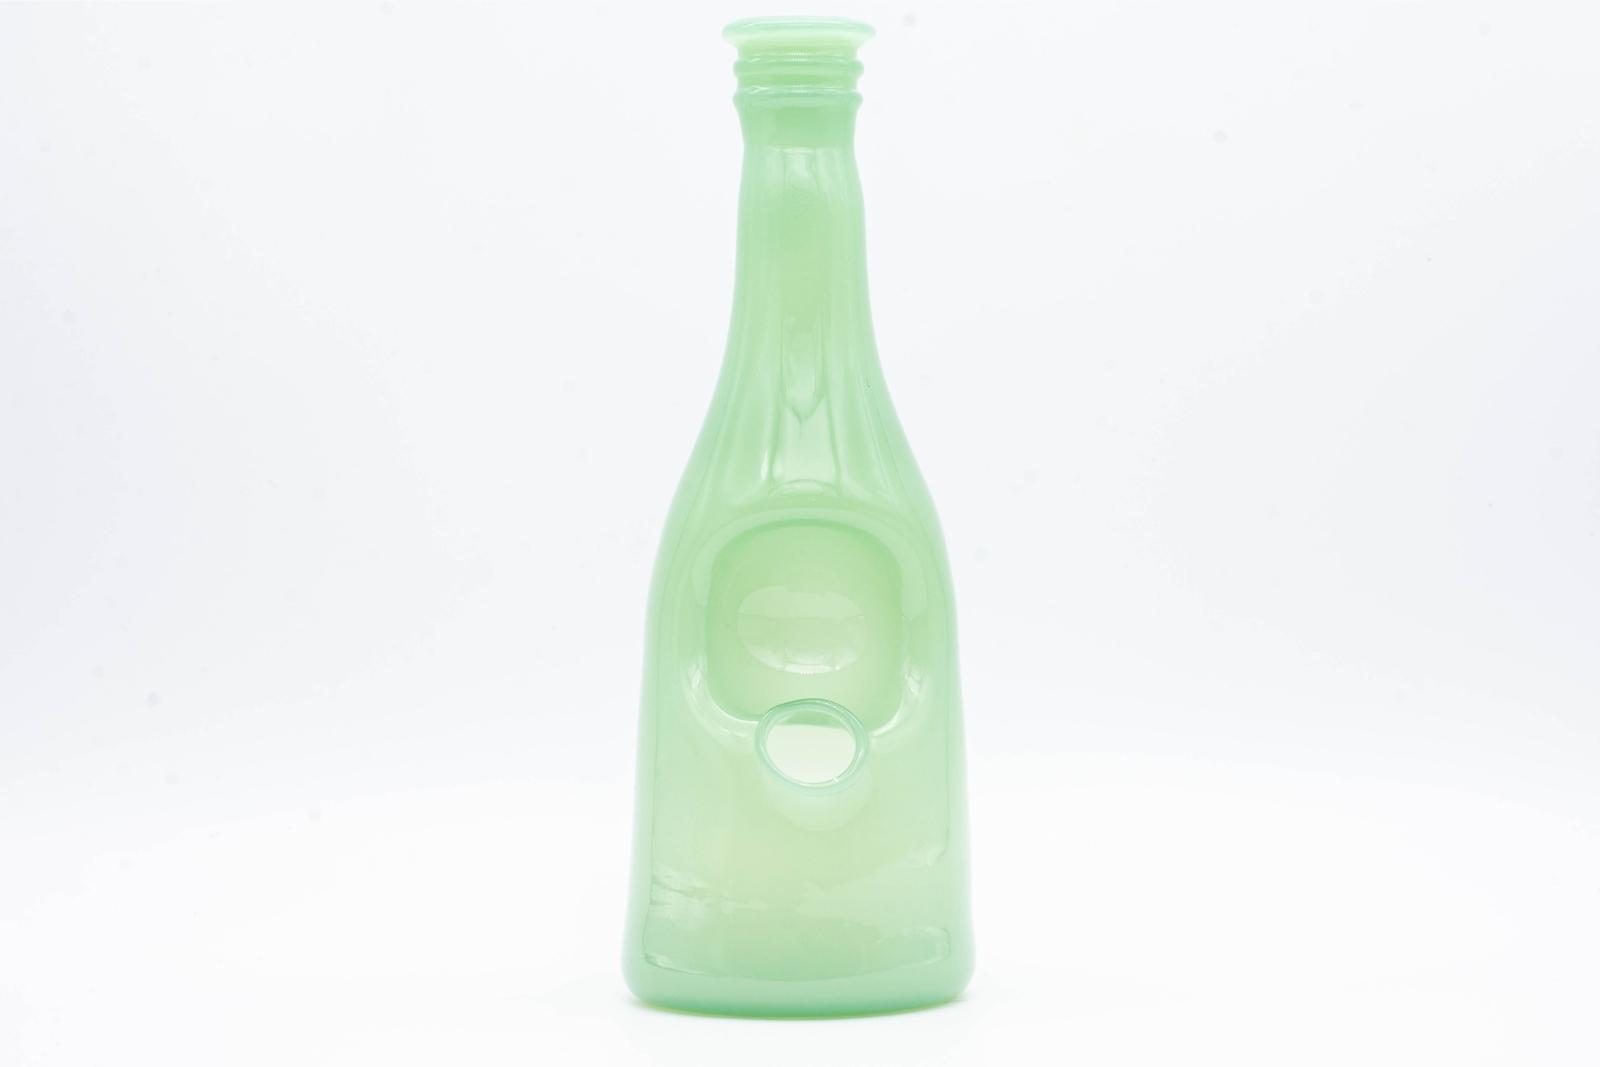 A seafoam green sake bottle rig by Costa Glass, on a white background